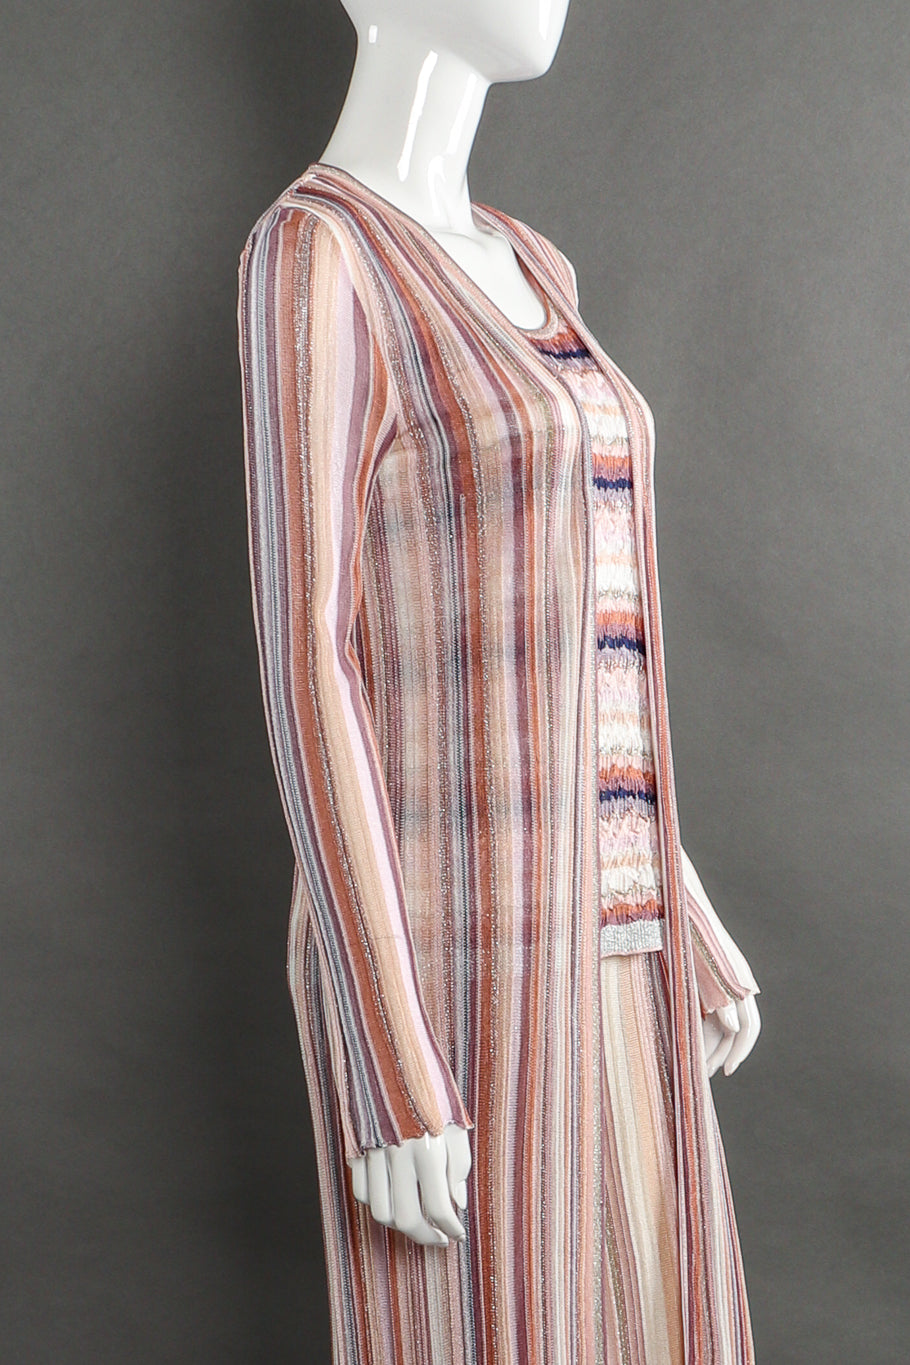 Missoni Striped Knit Duster, Tank, and Pants Set side view on mannequin closeup @Recessla